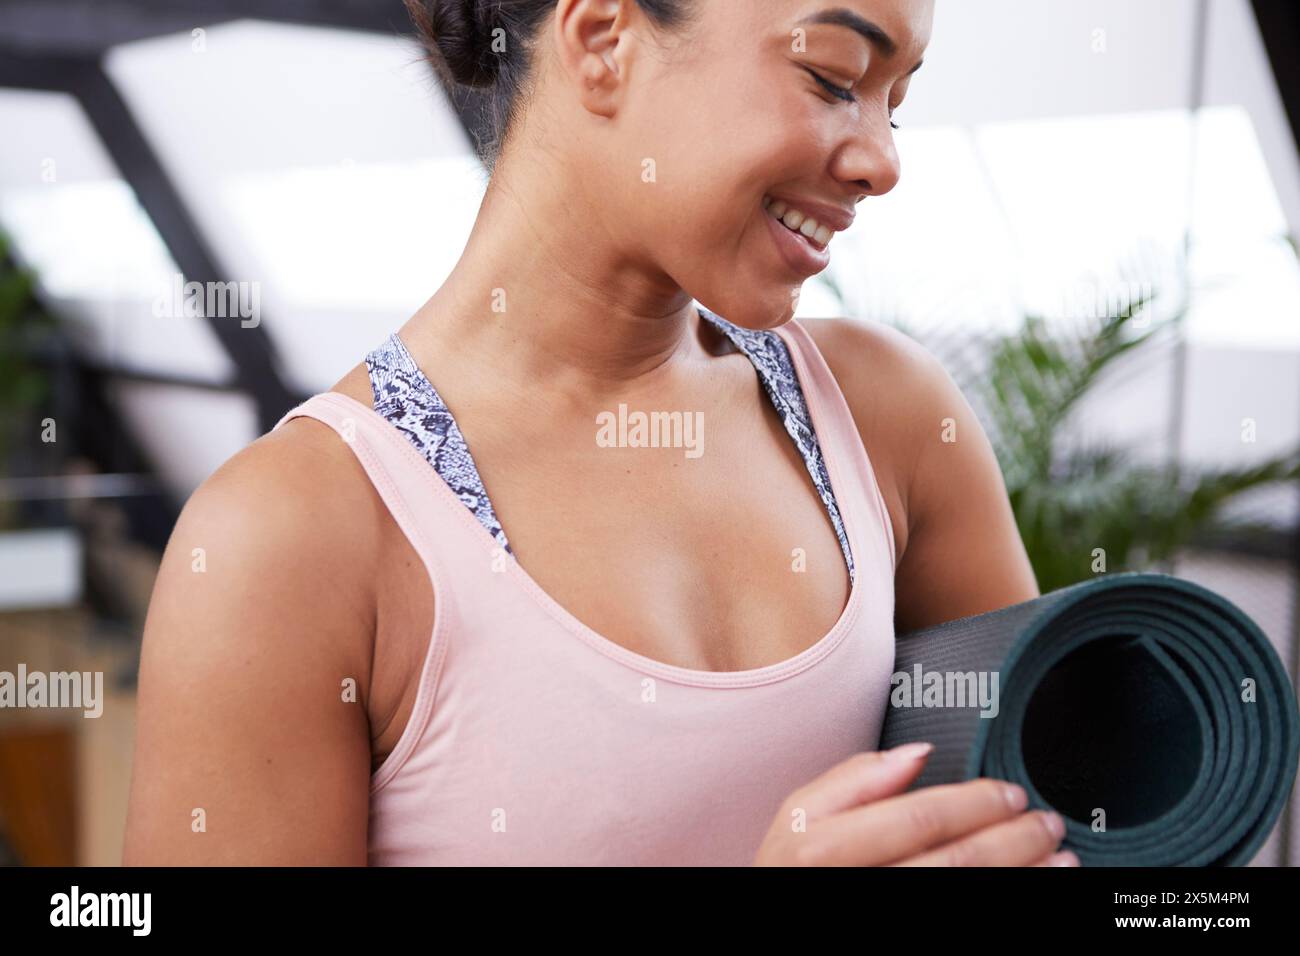 Smiling woman with exercise mat in pilates studio Stock Photo